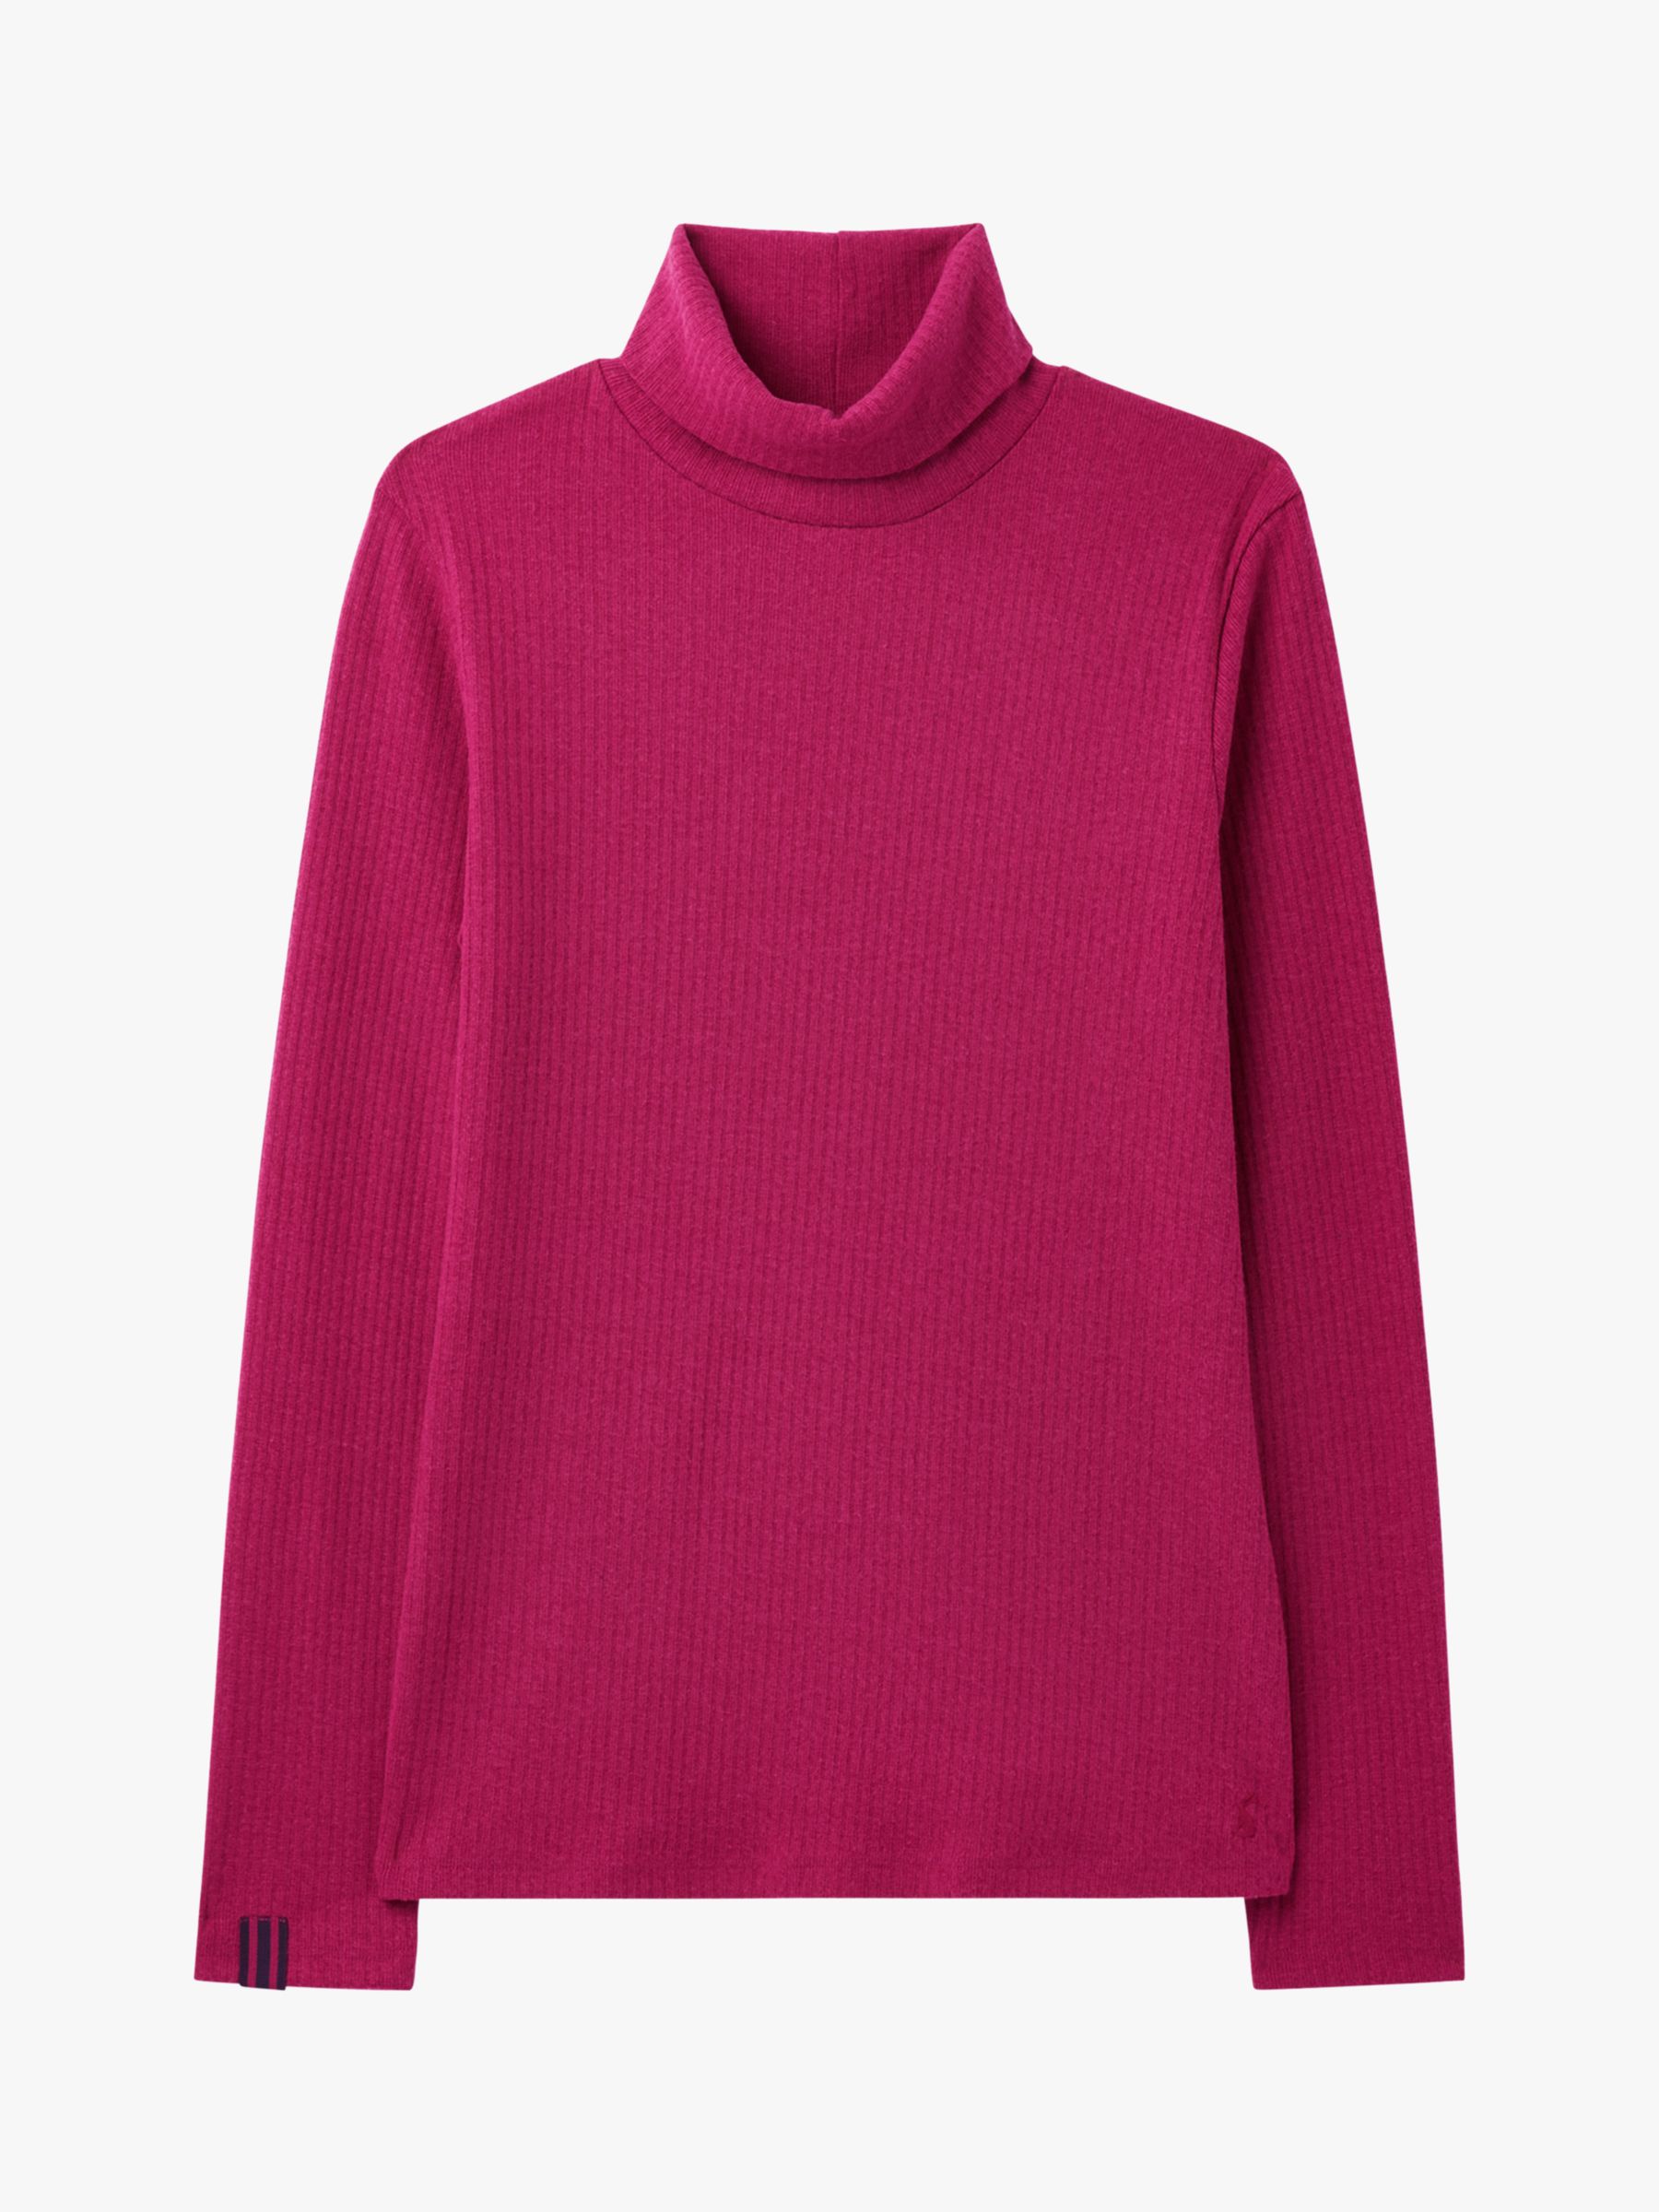 Joules Clarissa Roll Neck Top